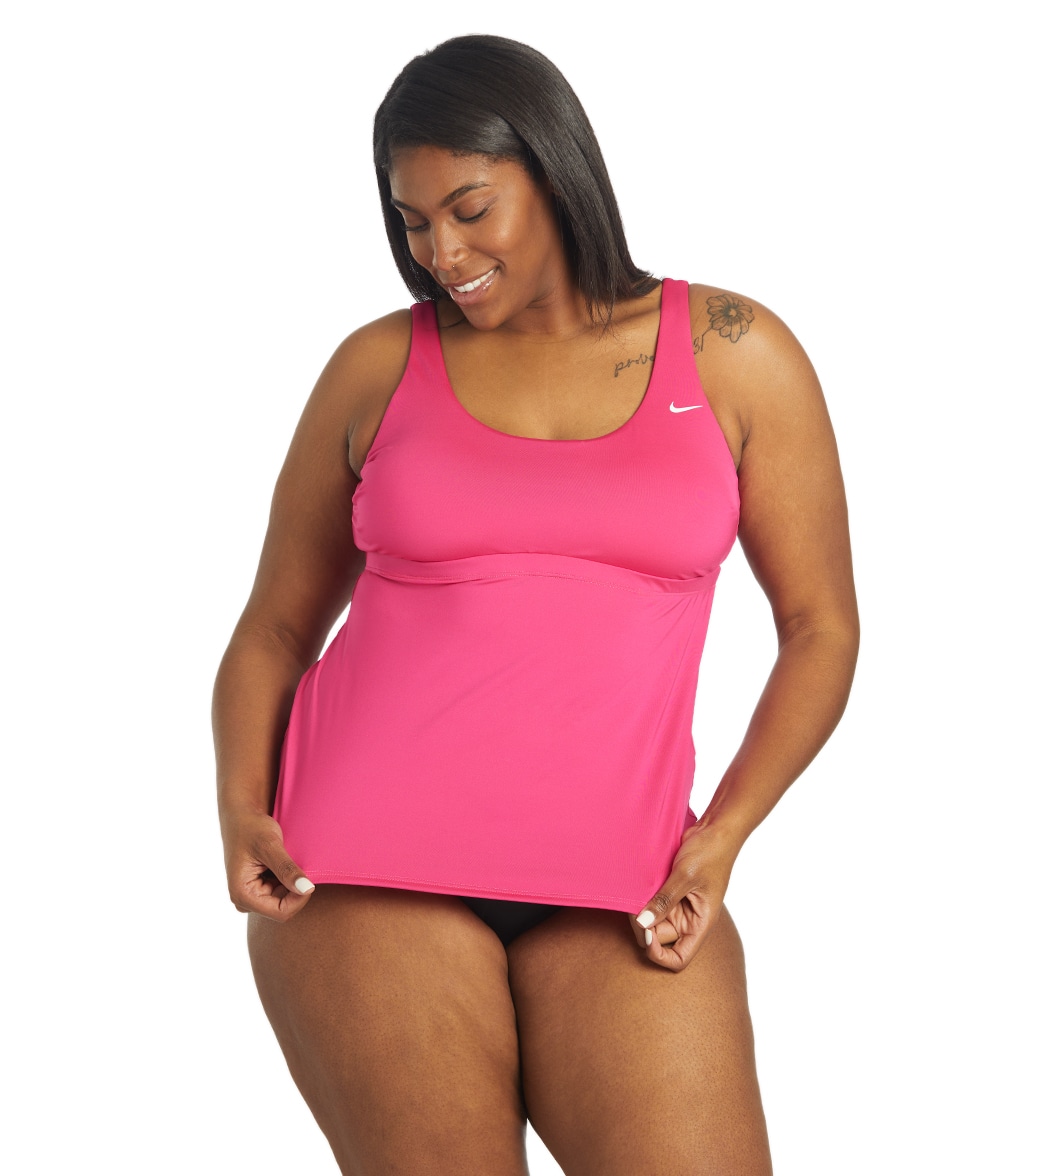 Nike Plus Size Scoop Neck Tankini Top - Pink Prime 1X Polyester - Swimoutlet.com